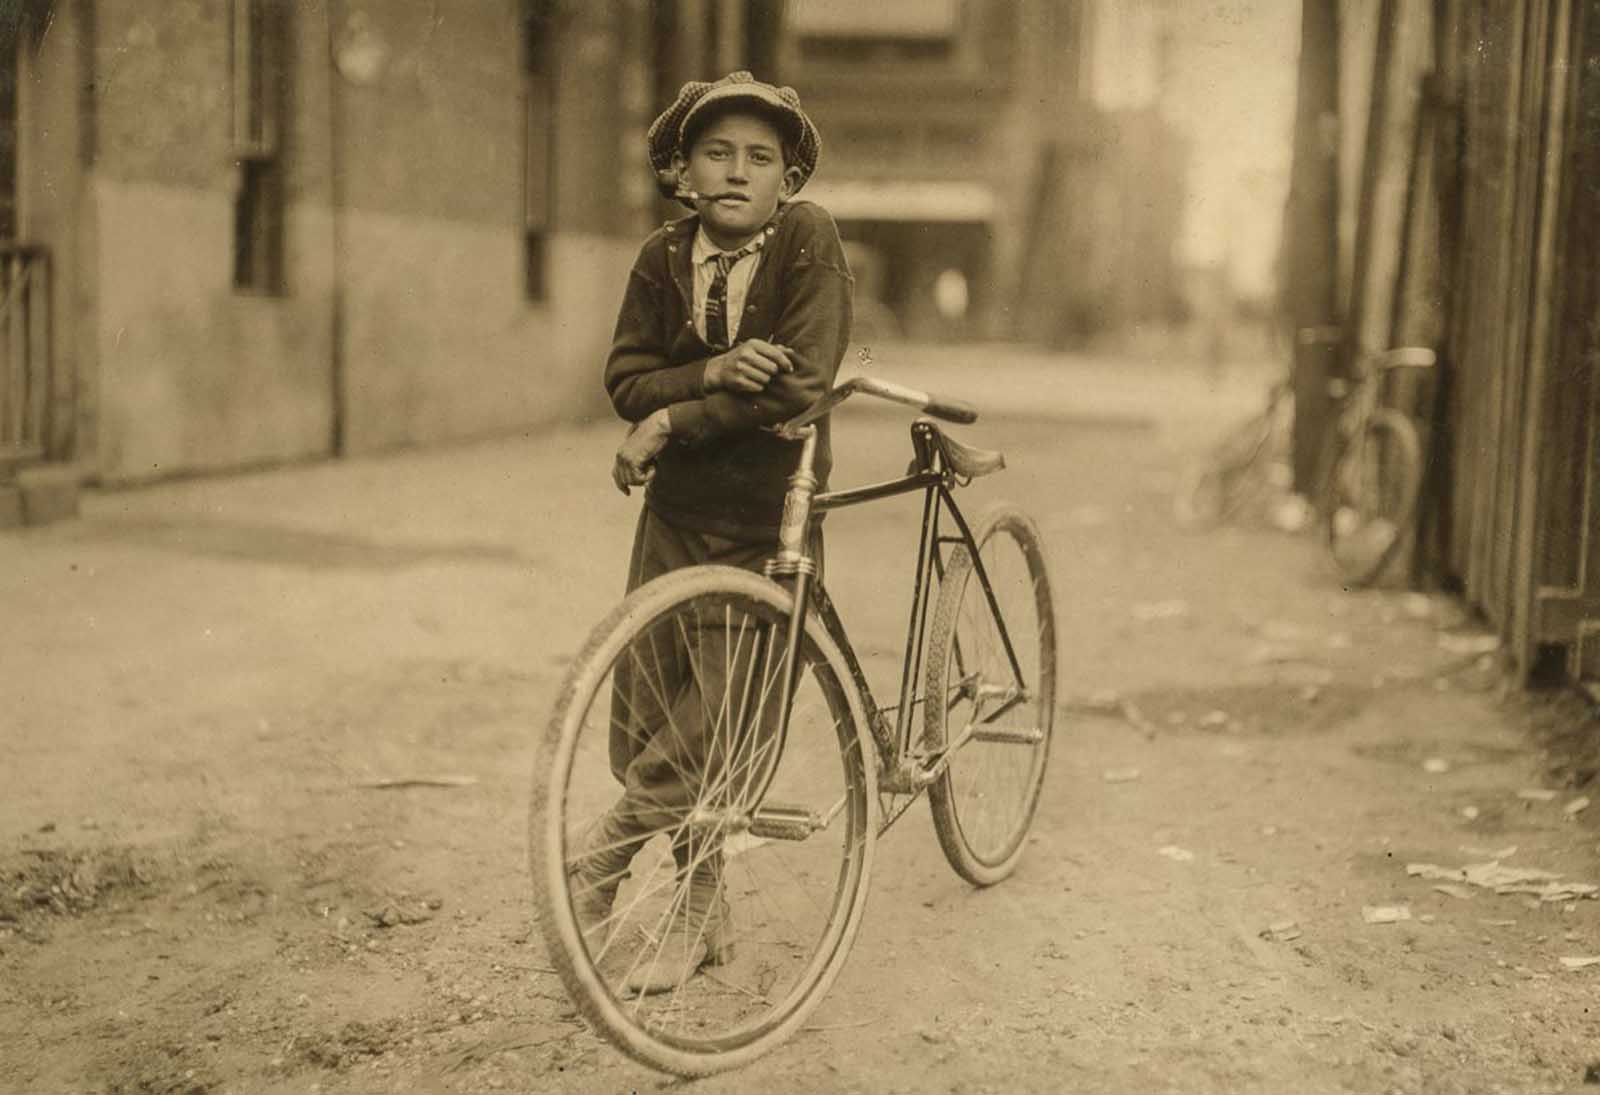 Messenger boy working for Mackay Telegraph Company. Said fifteen years old, 1913.